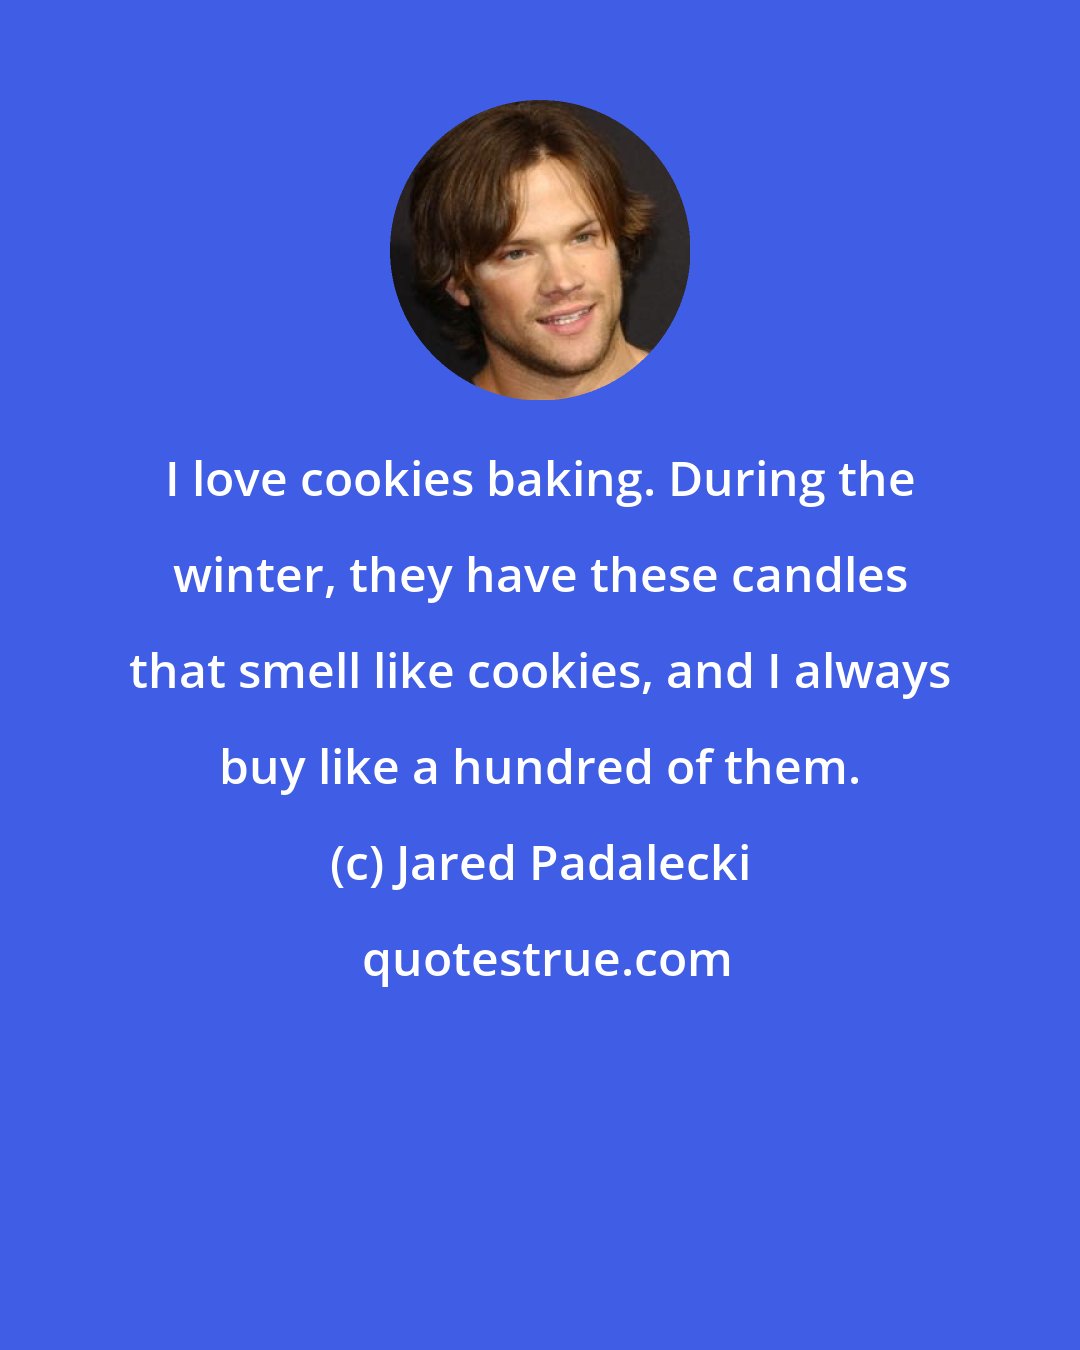 Jared Padalecki: I love cookies baking. During the winter, they have these candles that smell like cookies, and I always buy like a hundred of them.